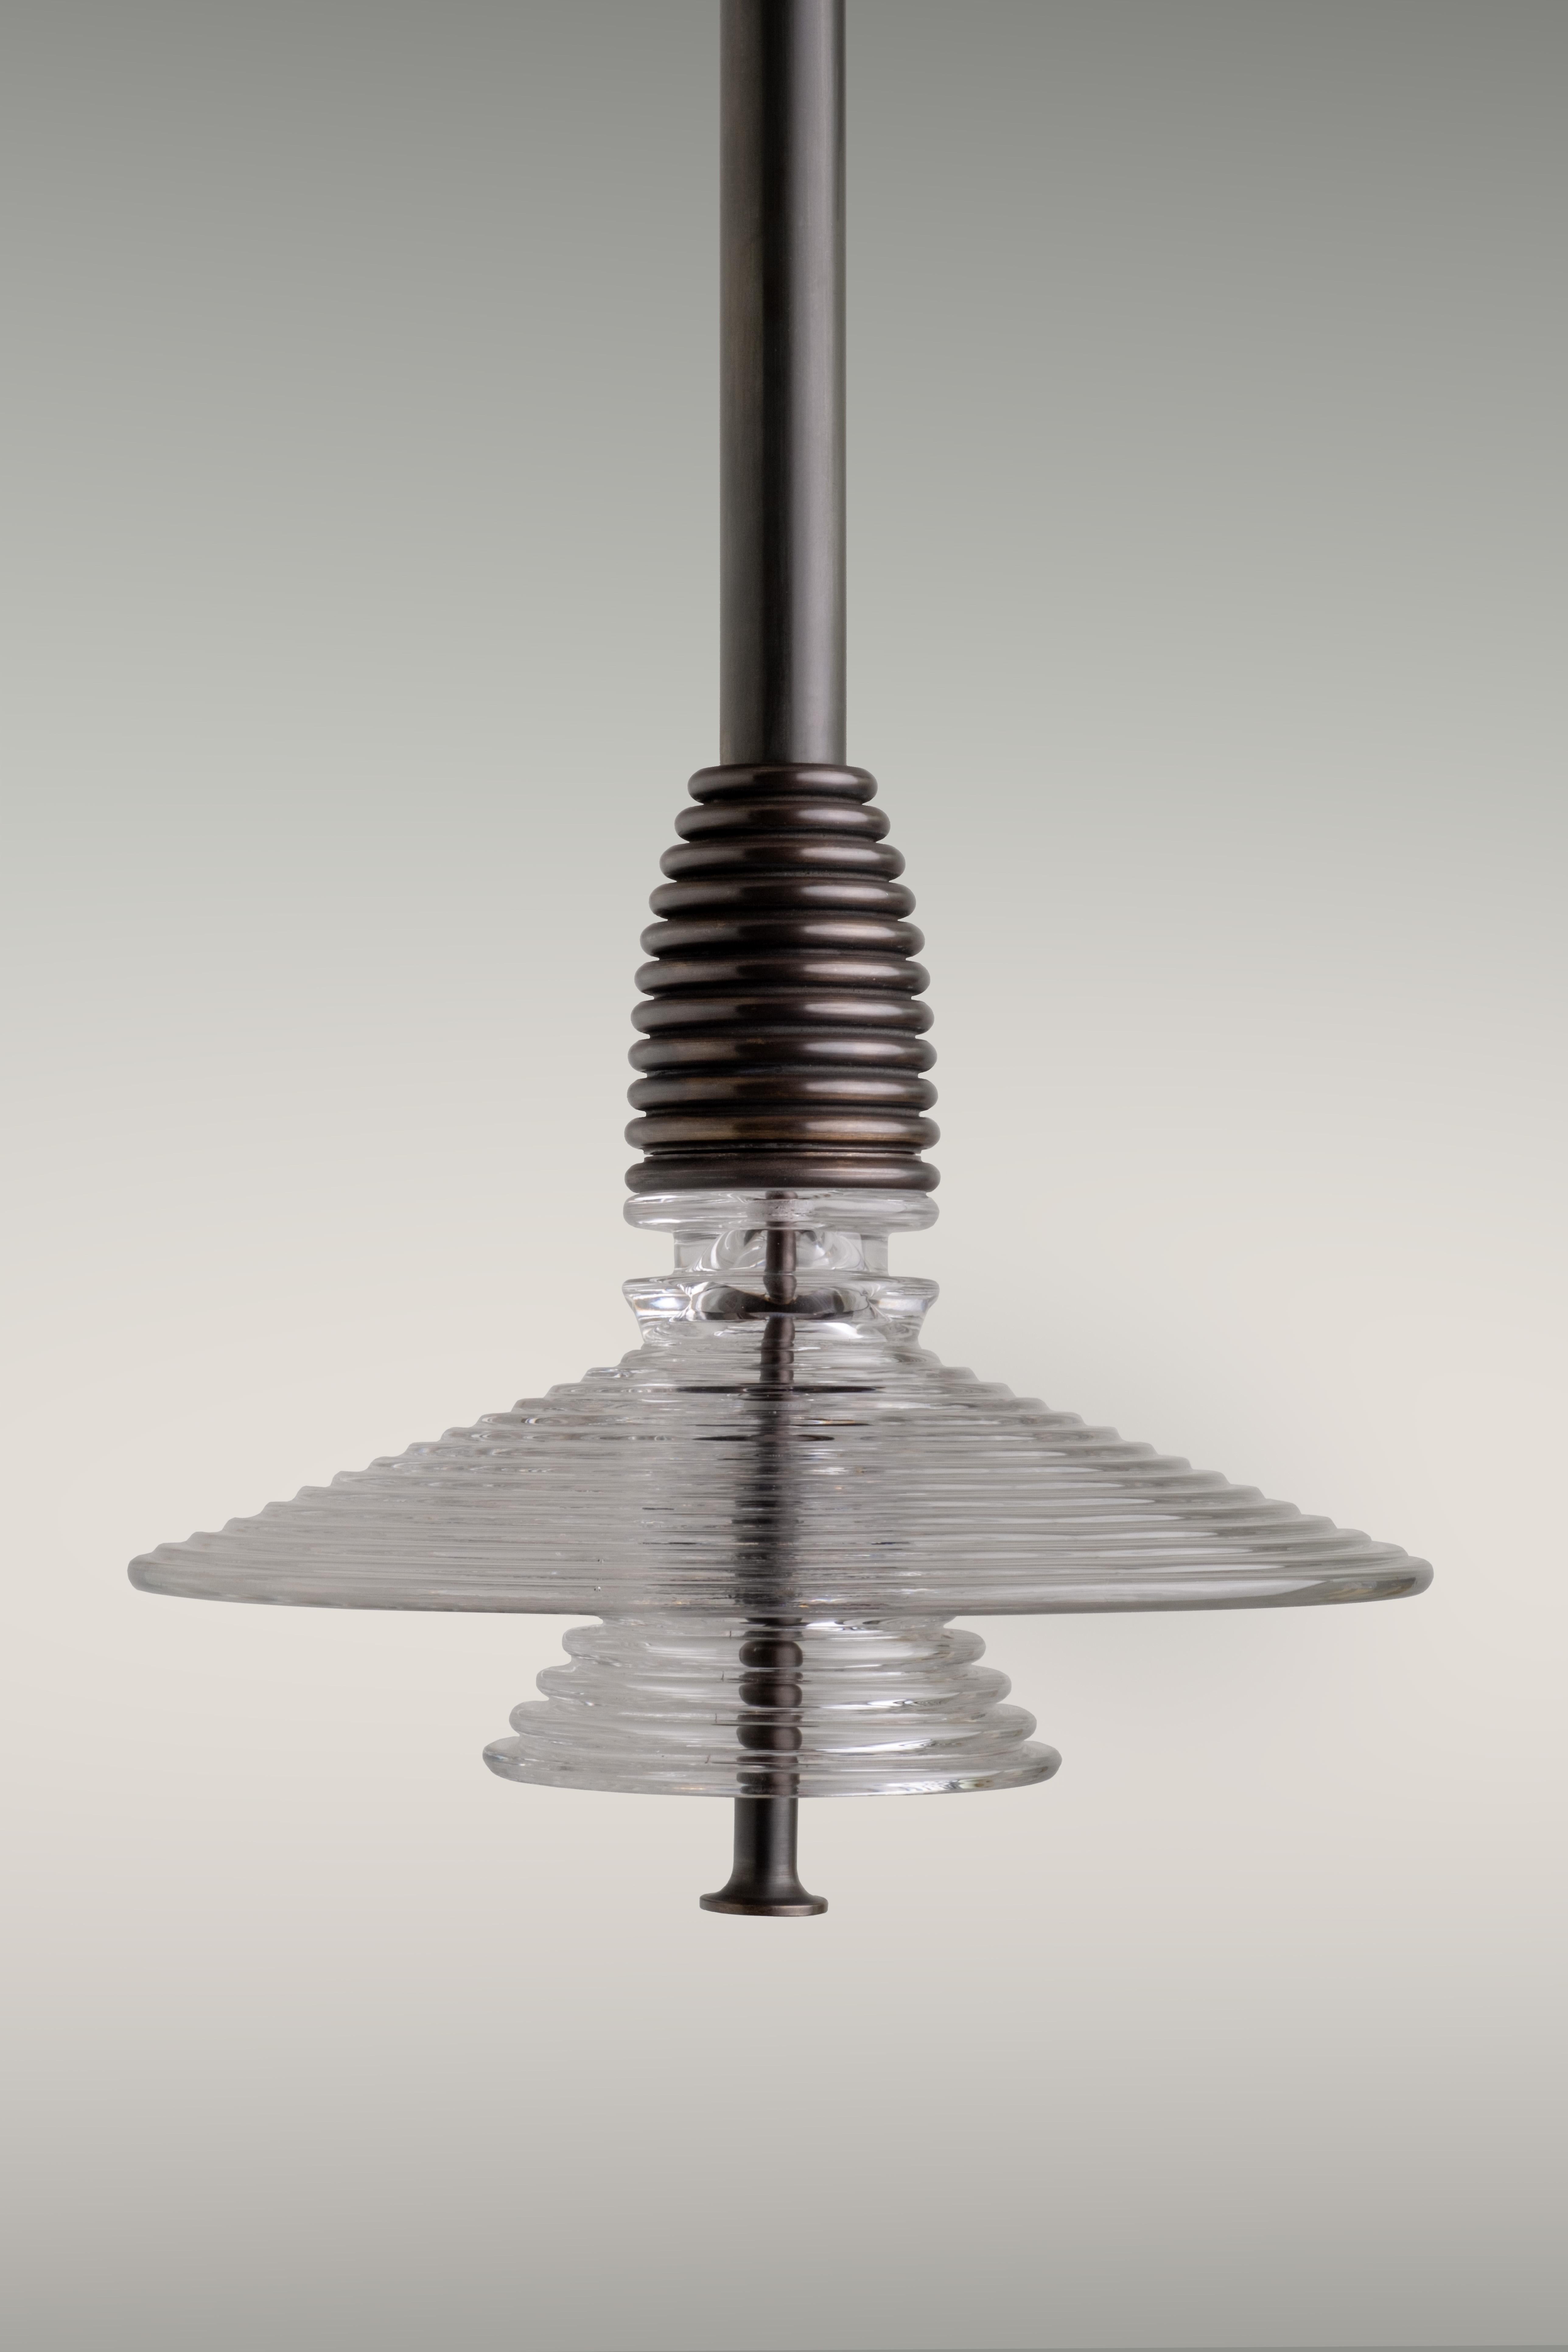 The Insulator 'AB' Pendant in dark brass and clear glass by NOVOCASTRIAN deco For Sale 4